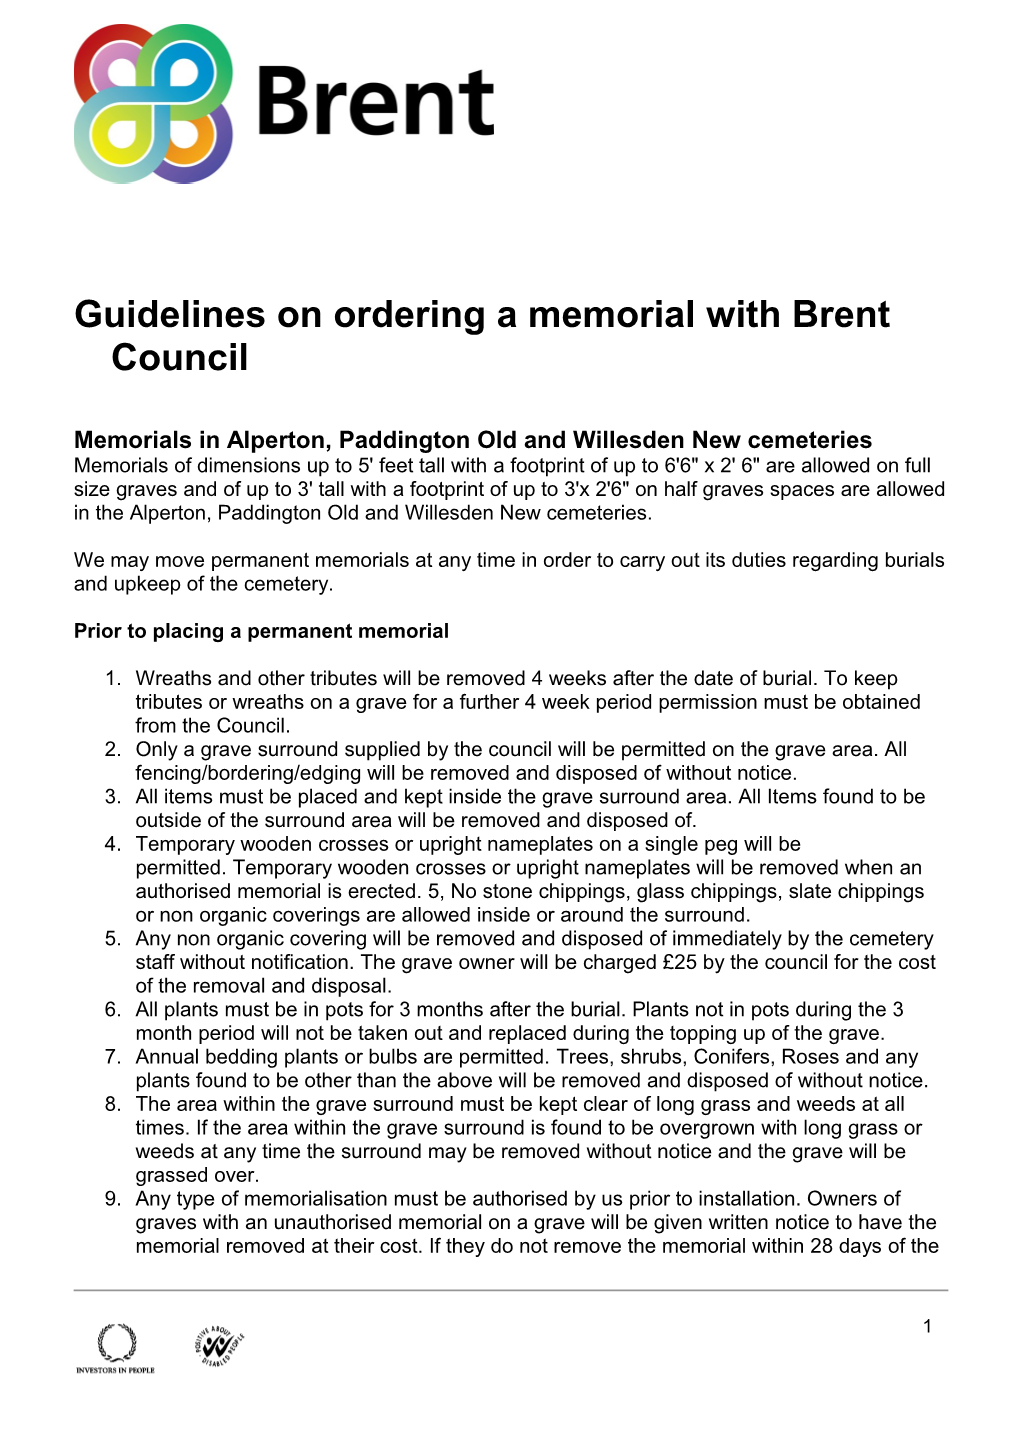 Guidelines on Ordering a Memorial with Brent Council